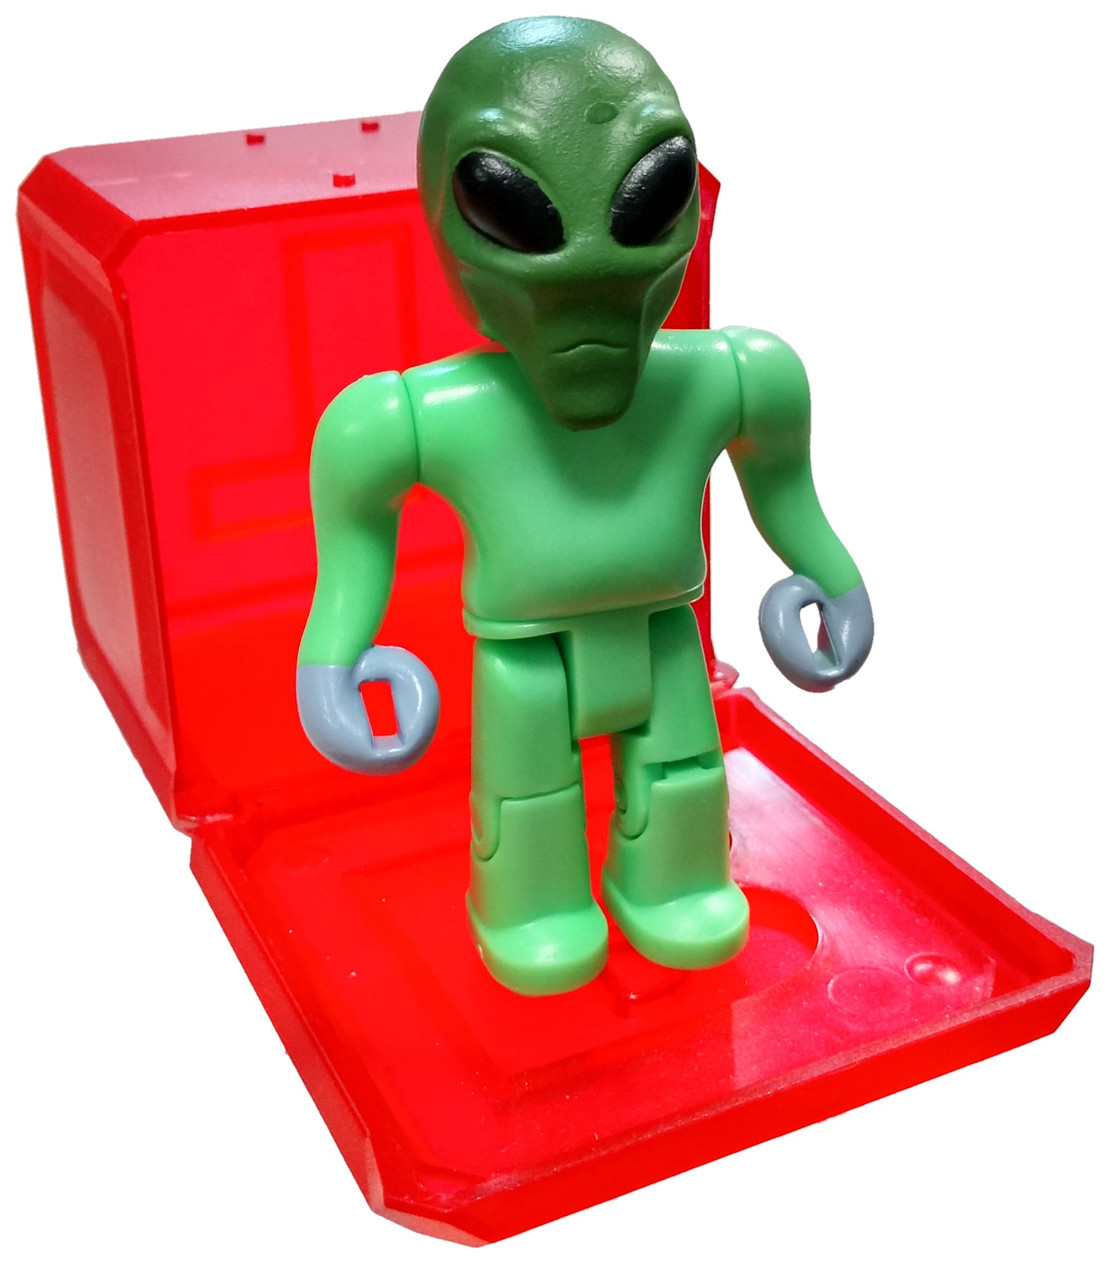 Roblox Celebrity Collection Series 5 Pinewood Alien 3 Mini Figure With Red Cube And Online Code Loose Jazwares Toywiz - pinewood computer core laggy update roblox